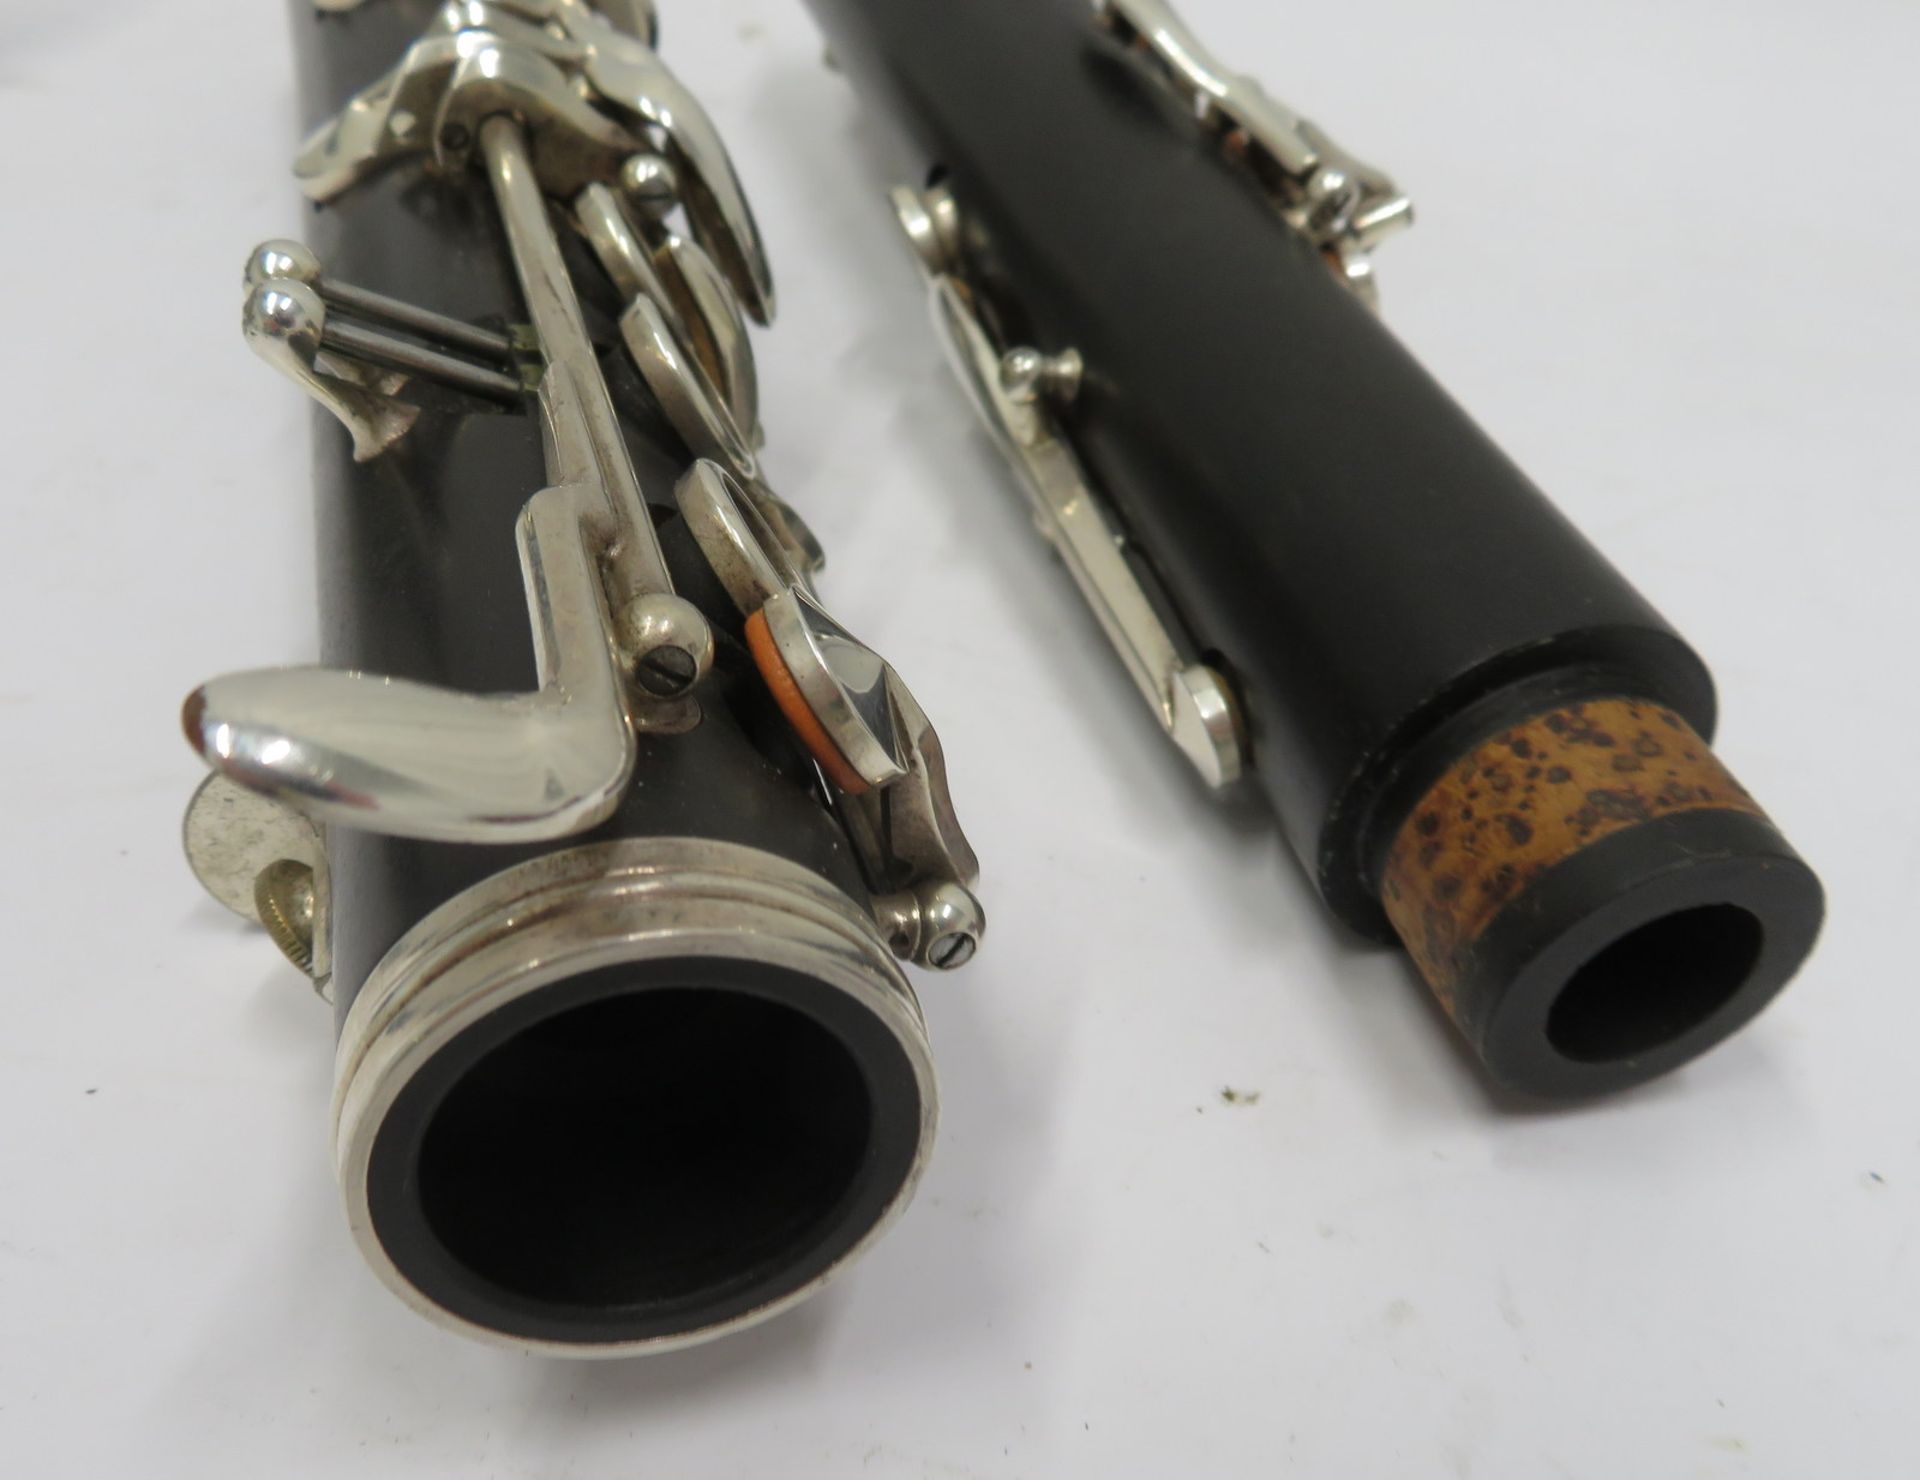 Buffet Crampon L Green clarinet with case. Serial number: 477678. - Image 16 of 19